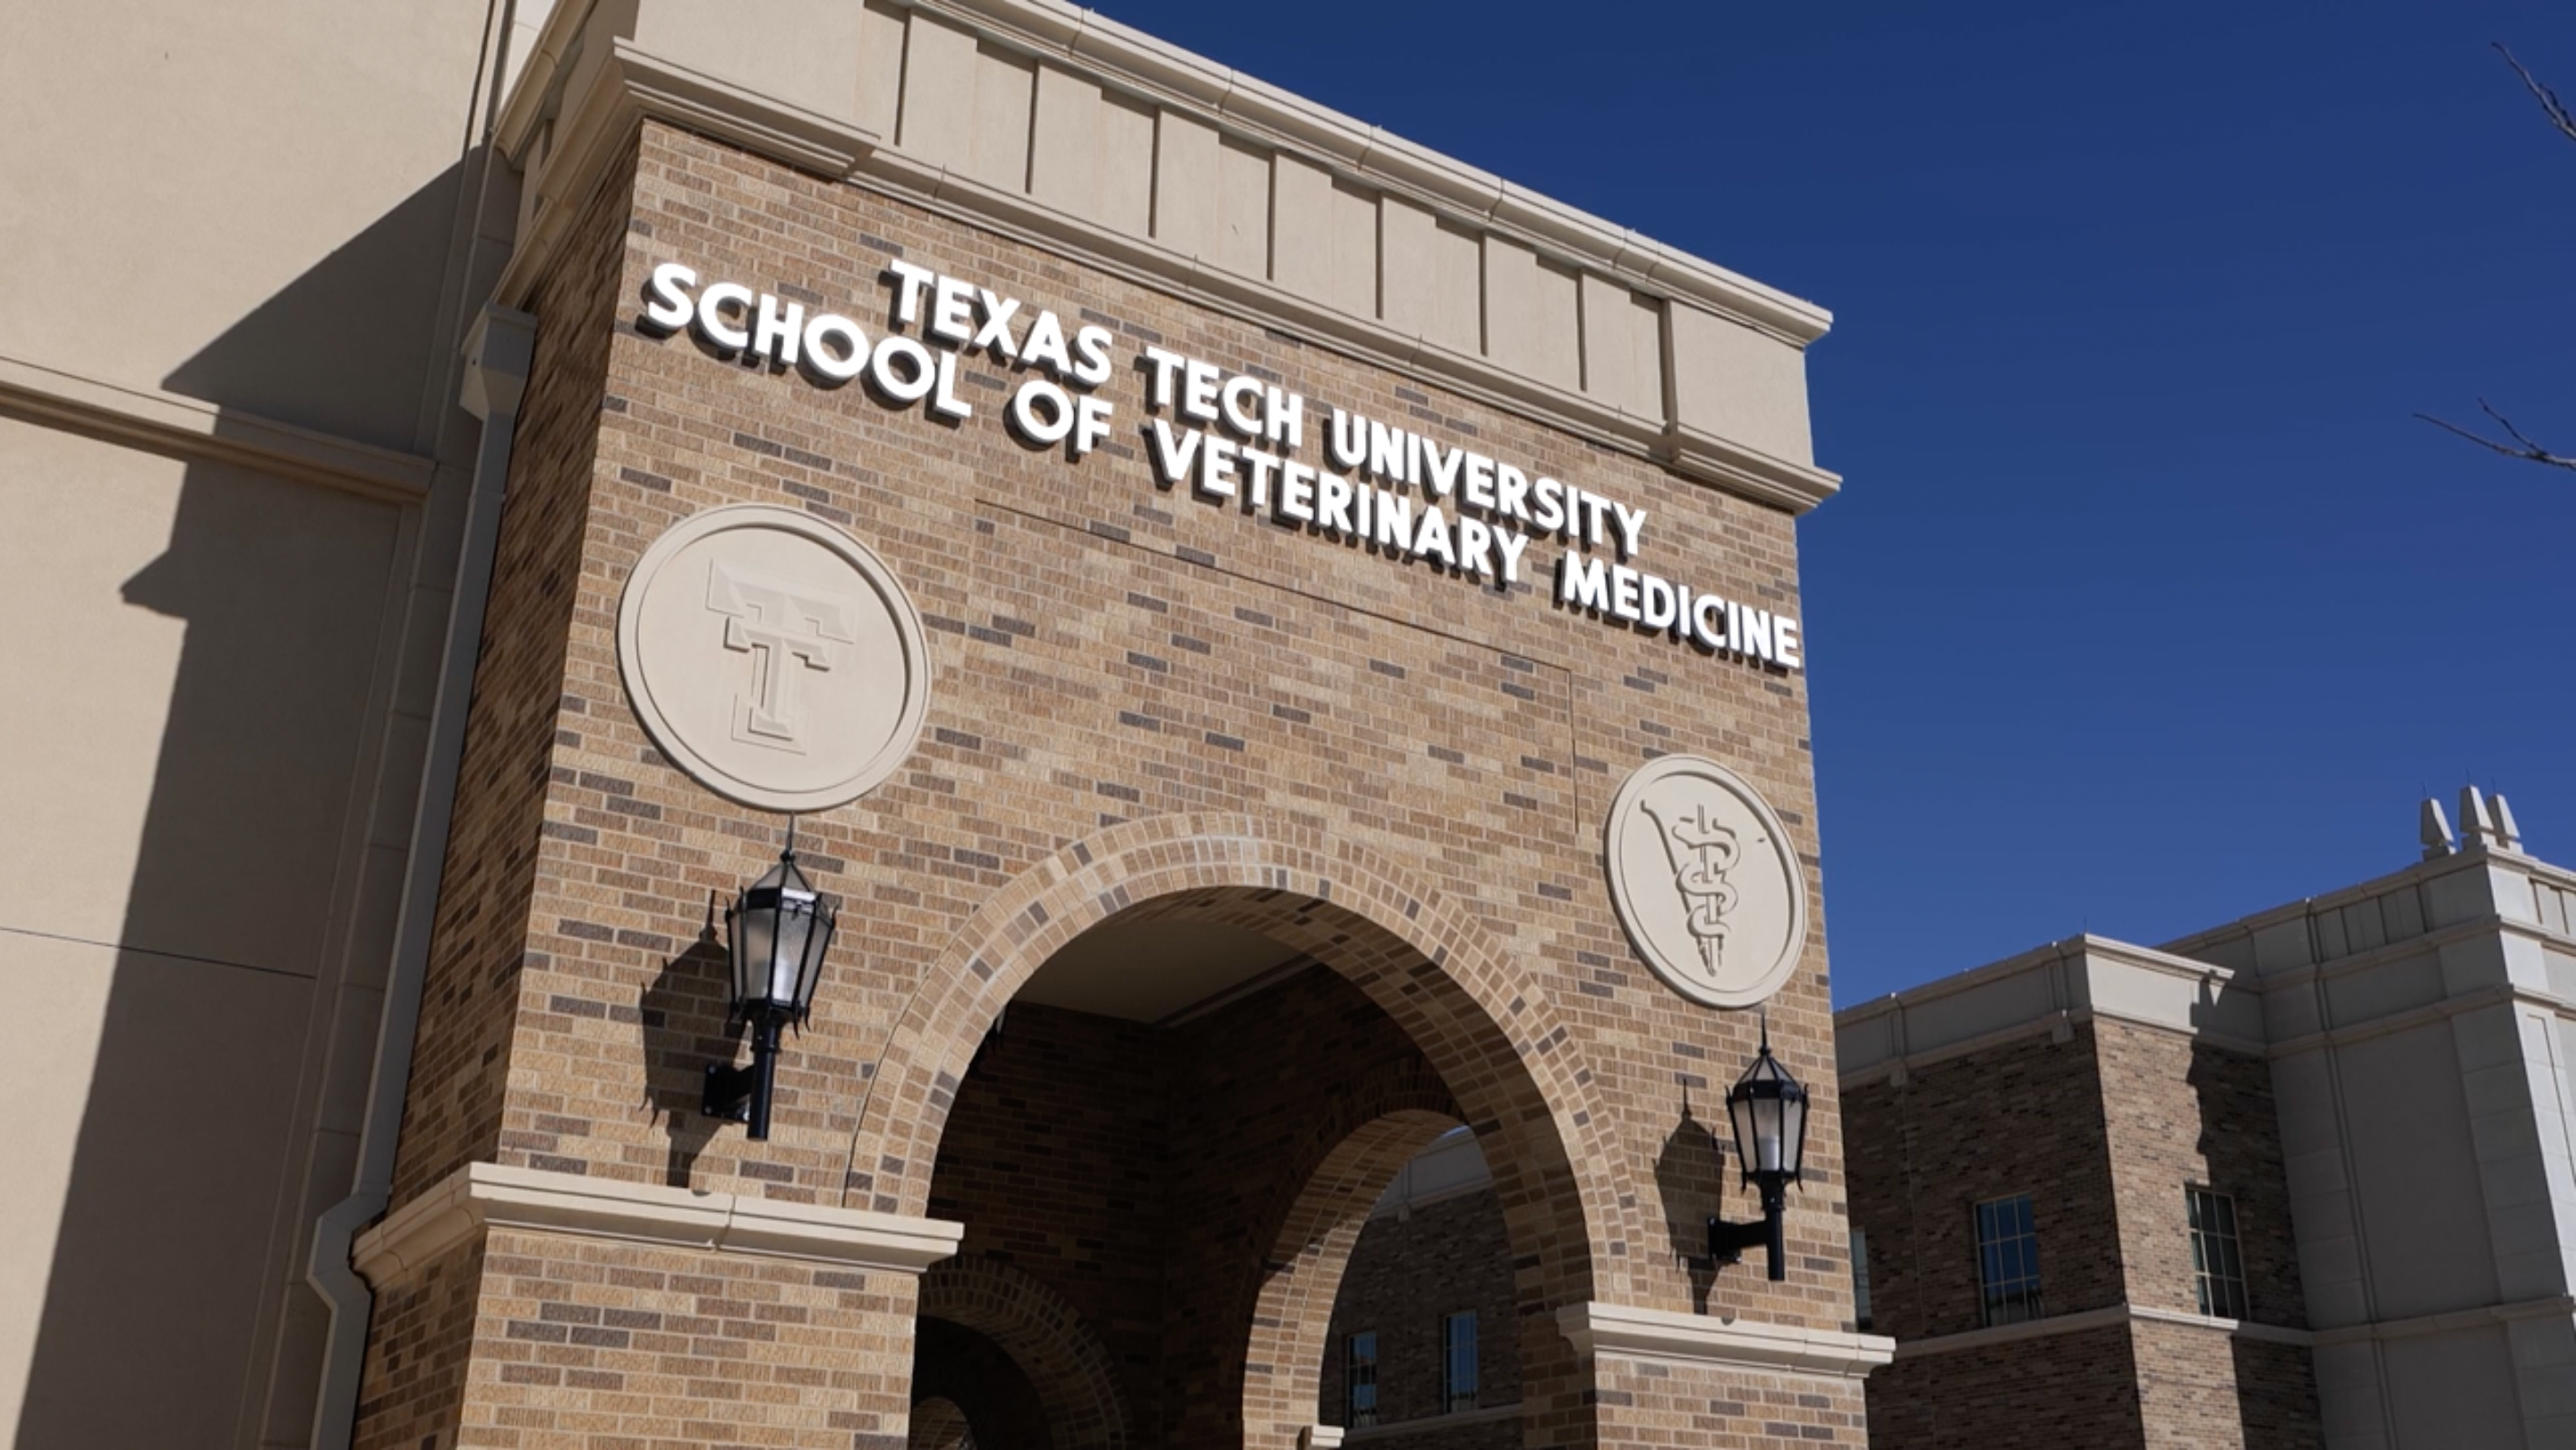 Texas Tech opens Texas’ first new veterinary school in more than a century